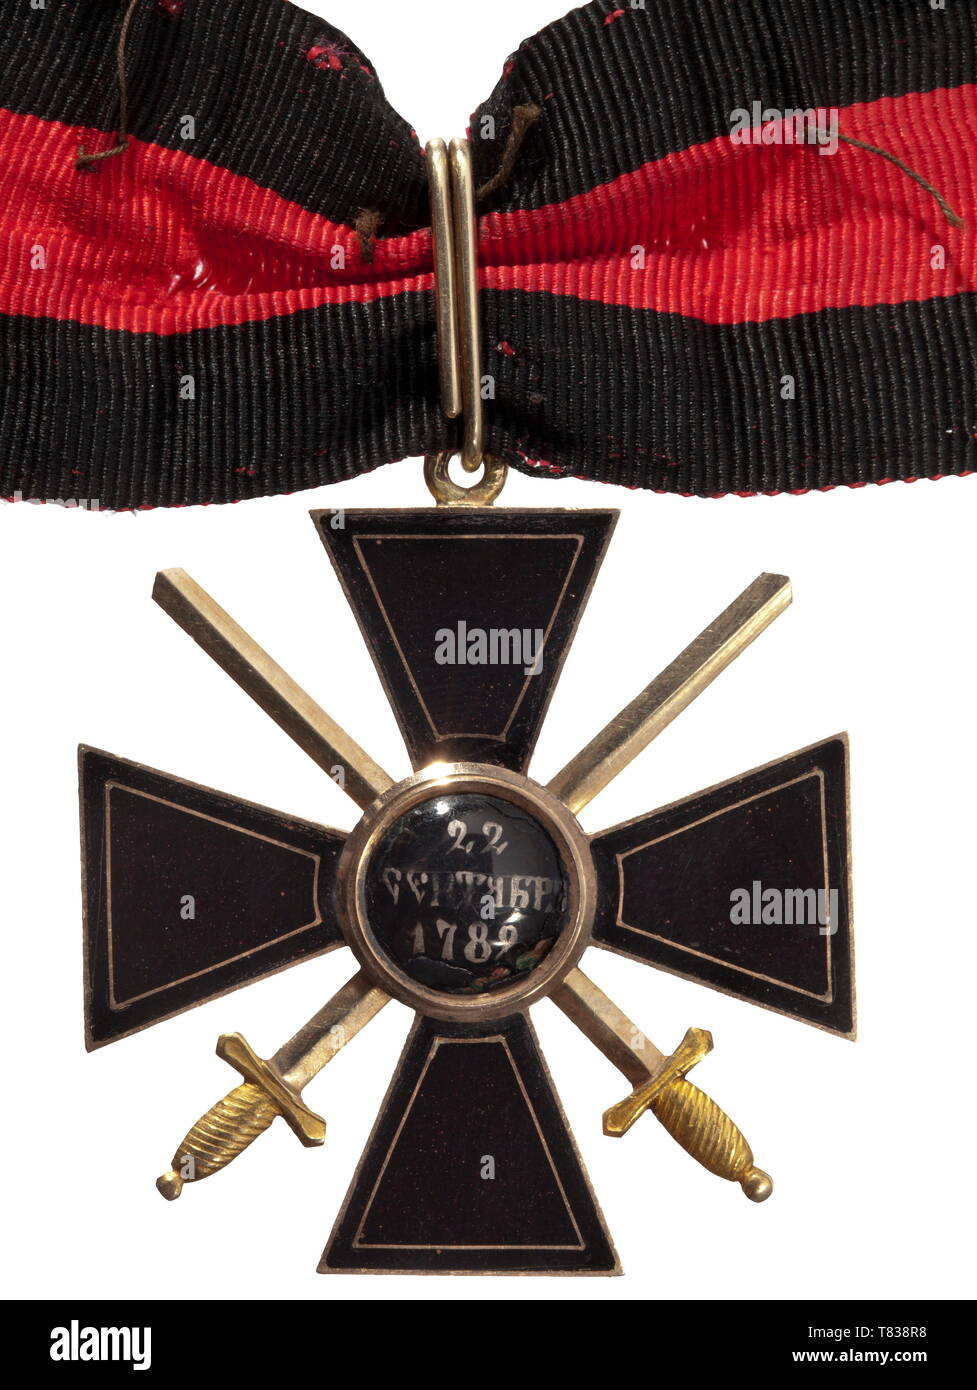 An Order's Cross 4th Class with Swords of the Order of St. Vladimir This exemplar in gold, made in circa 1860, is one of the famous 'Black Series' of the Russian orders system. Probably due to a fashion trend of the time, these decorations were commissioned by private order and produced completely in black instead of red enamel. The cross arms are perfectly flatly polished in the highest enamel work traditions of the period, and are especially desirable because of the fine linear gold décor and edging. The swords are fashioned in gold using bicol, Additional-Rights-Clearance-Info-Not-Available Stock Photo